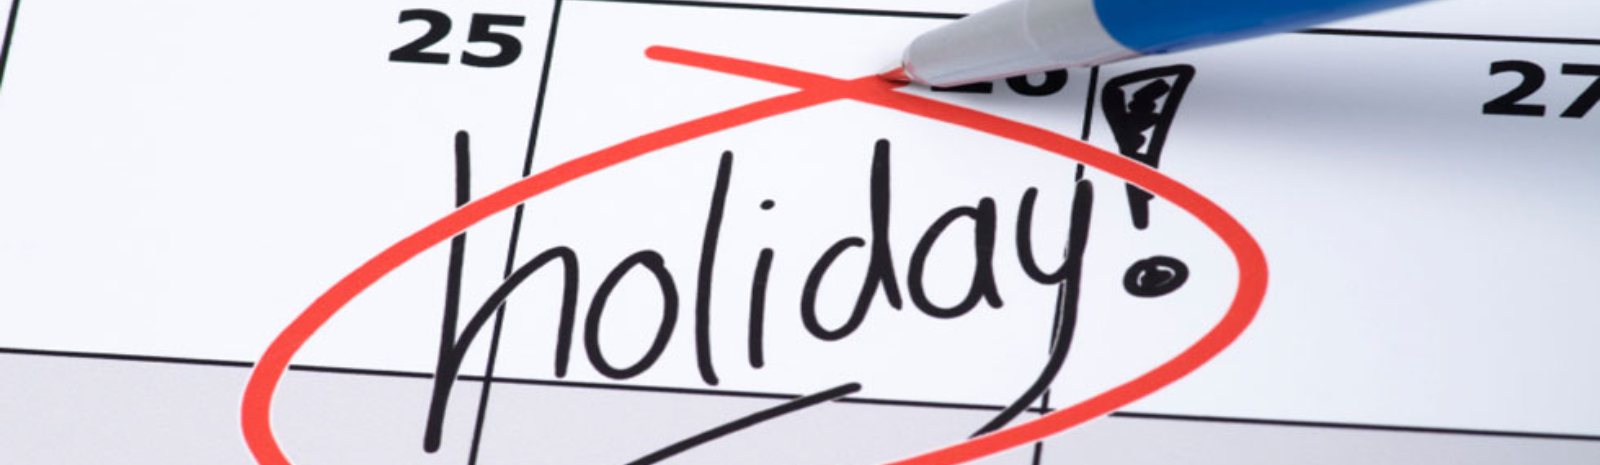 the word holiday circled on a calendar